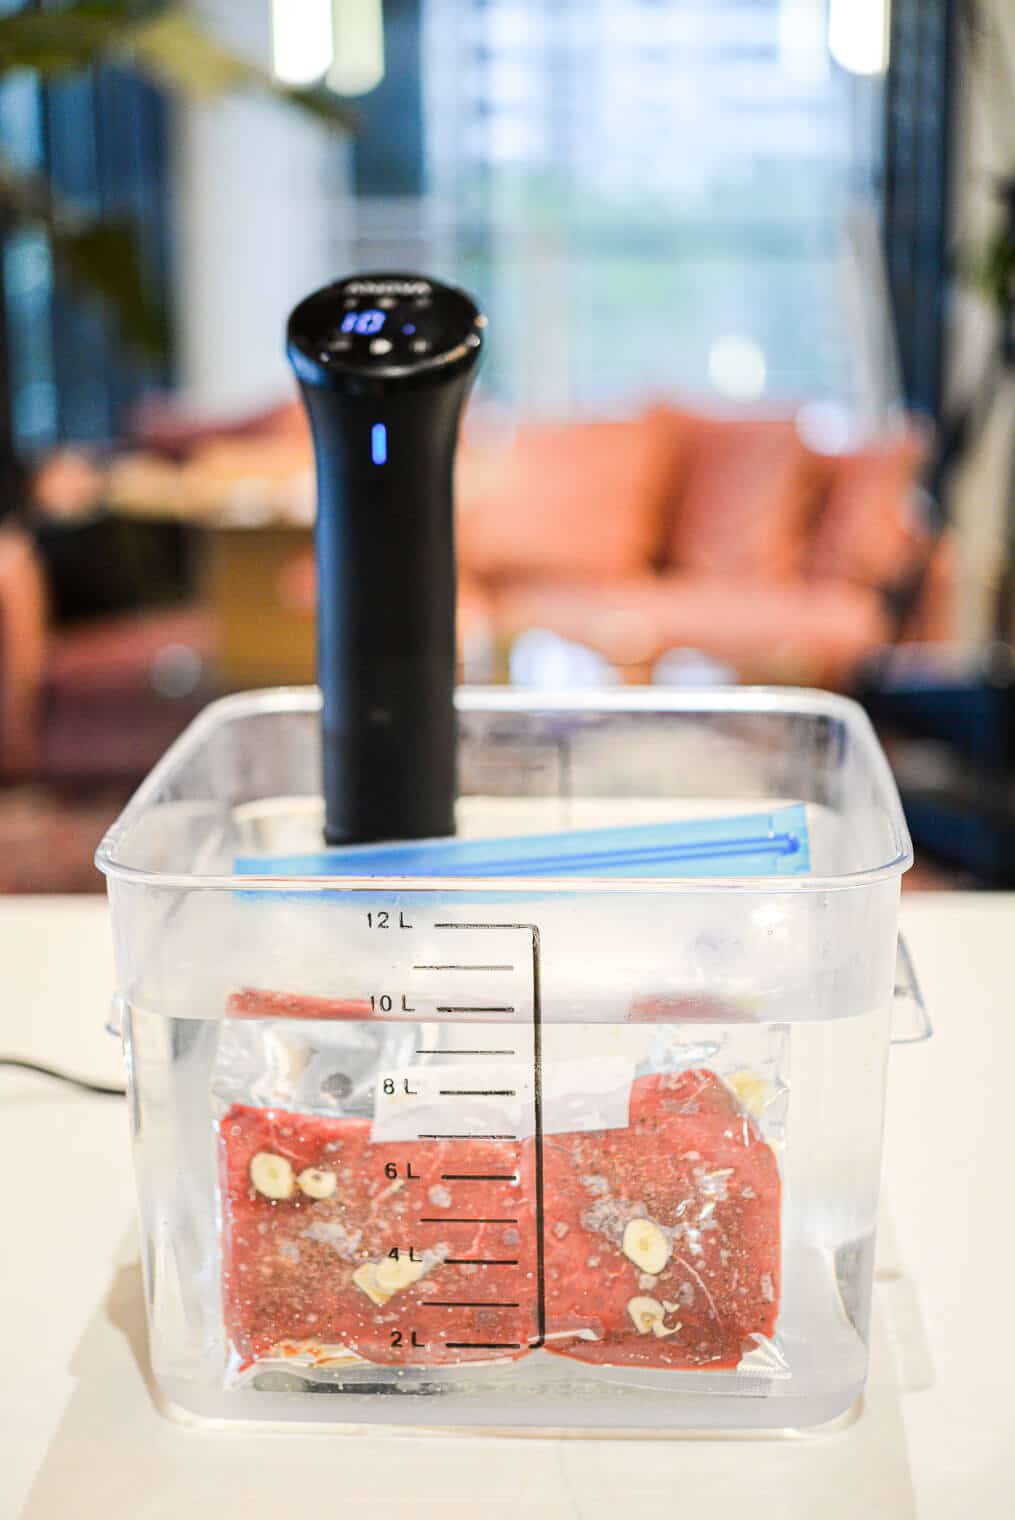 Large plastic container filled with water and black handled sous vide machine sitting on countertop with steaks cooking sous vide style inside